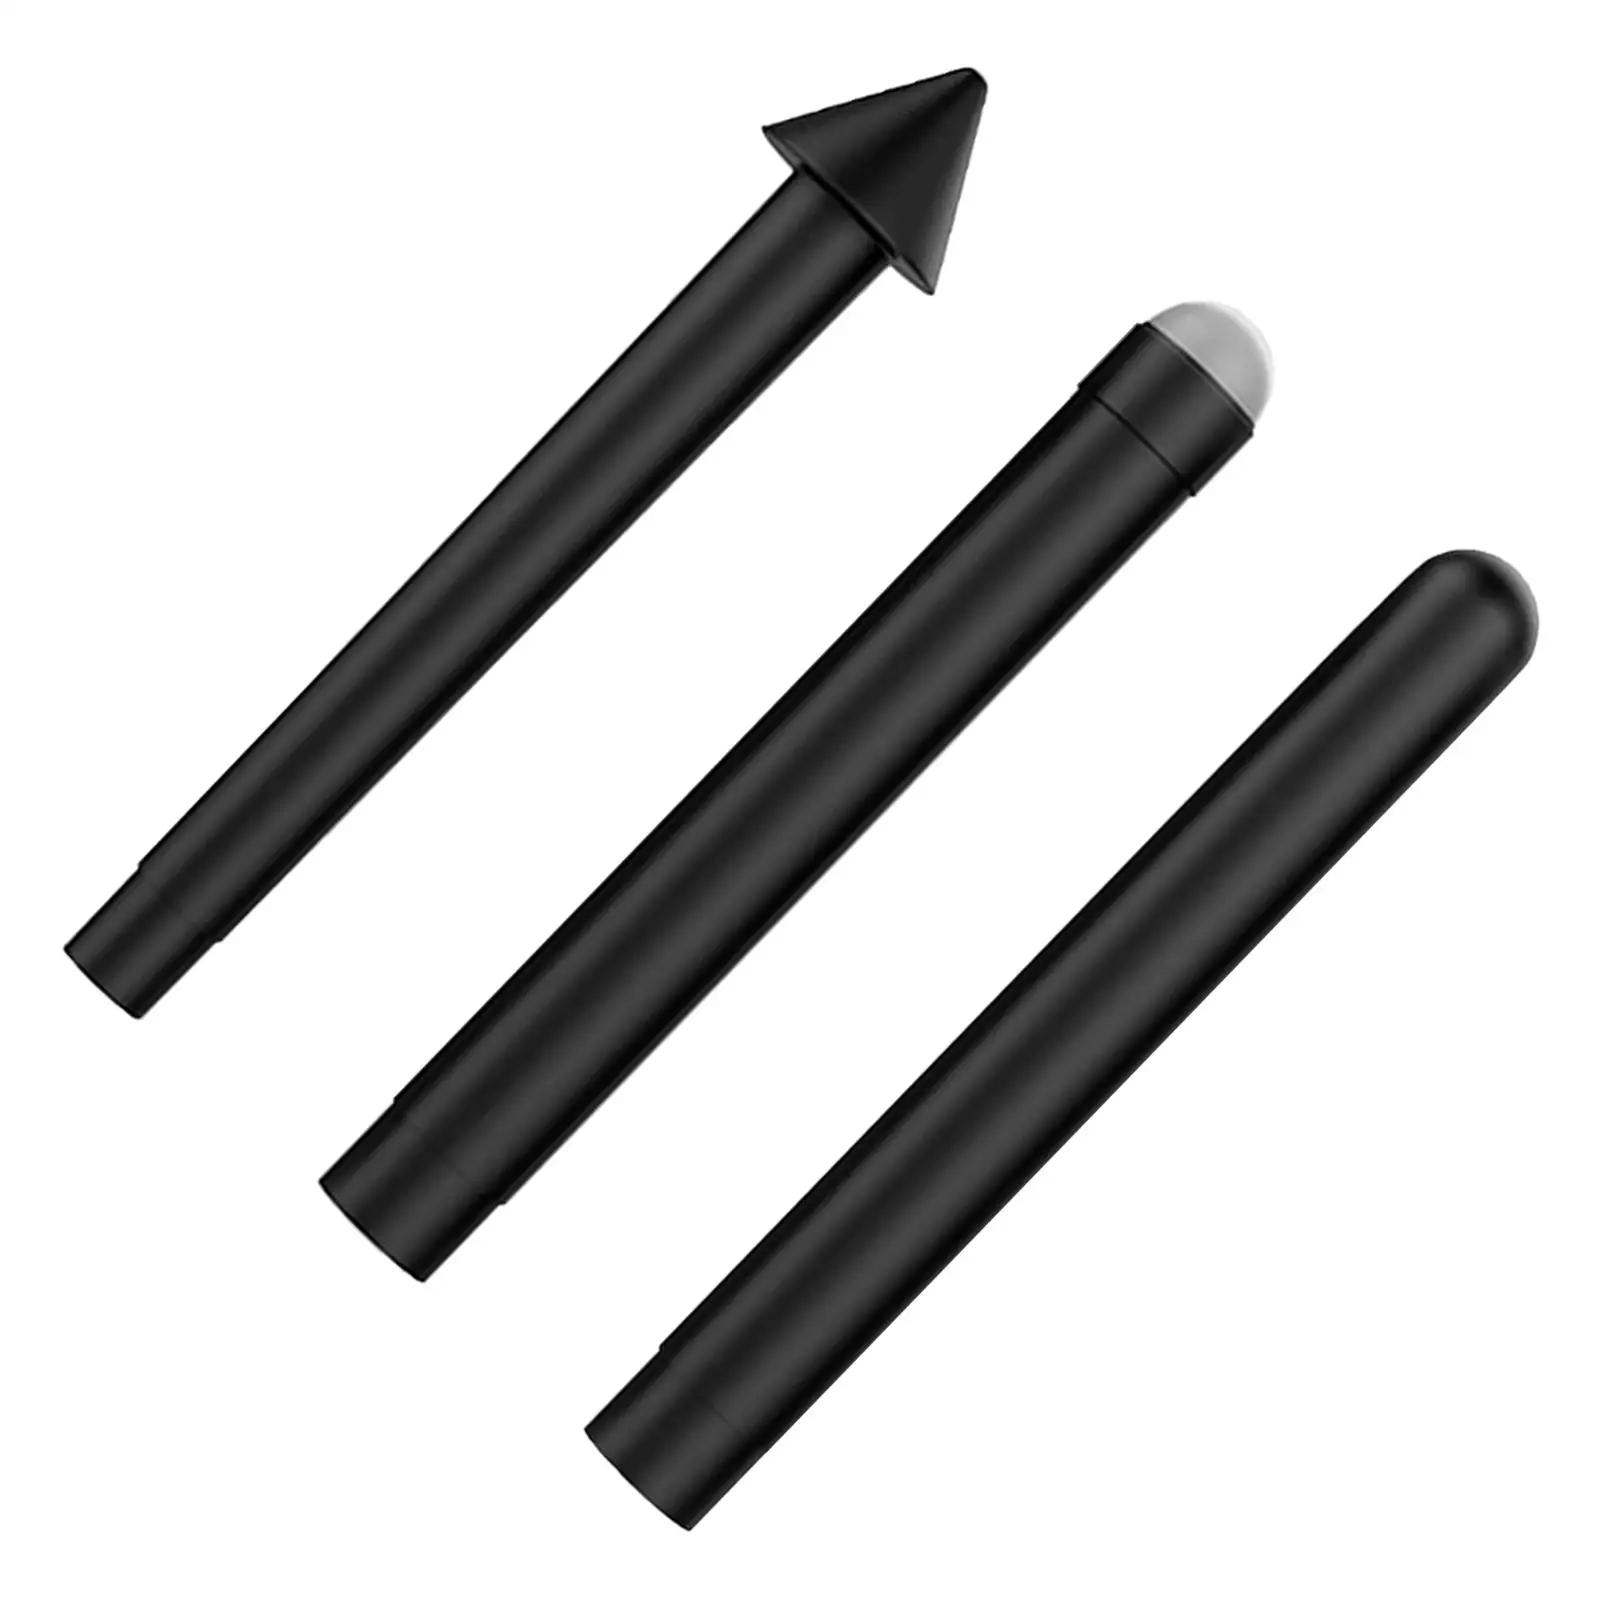 3x Flexible  Tips 2H H Smooth Writing Tablet Touch PensNibs for  Surface  6 7  Tips Replacement Black